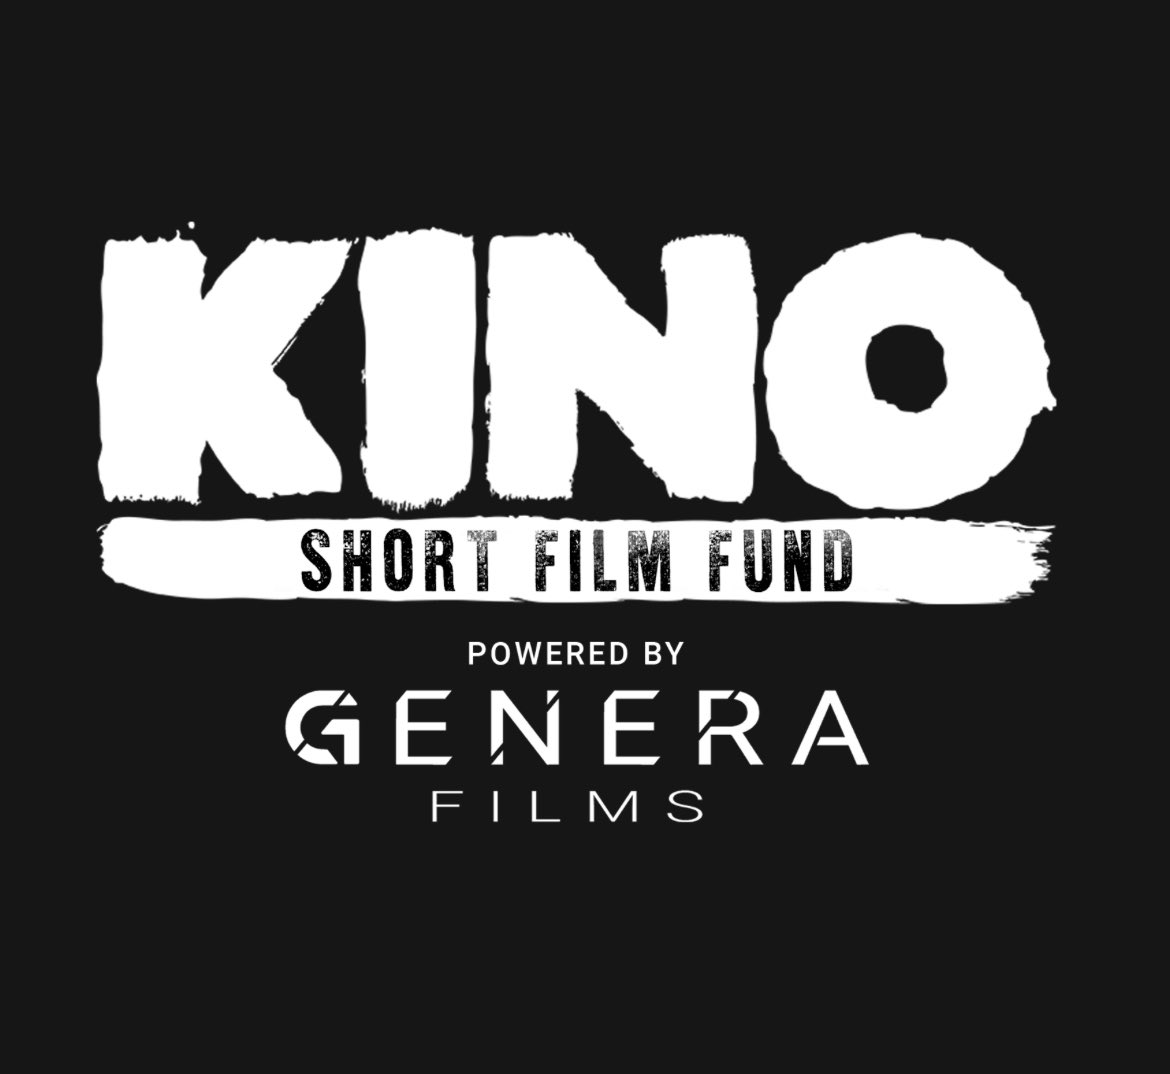 It’s the last month to submit your film idea to @kinoshortfilm film fund to get yourself in the running for a whopping £5k!💰 They support all points during production so whether you’ve got a film cut, ready to go or just at script stage, take a look 👇 generafilms.com/powered-by/kin…